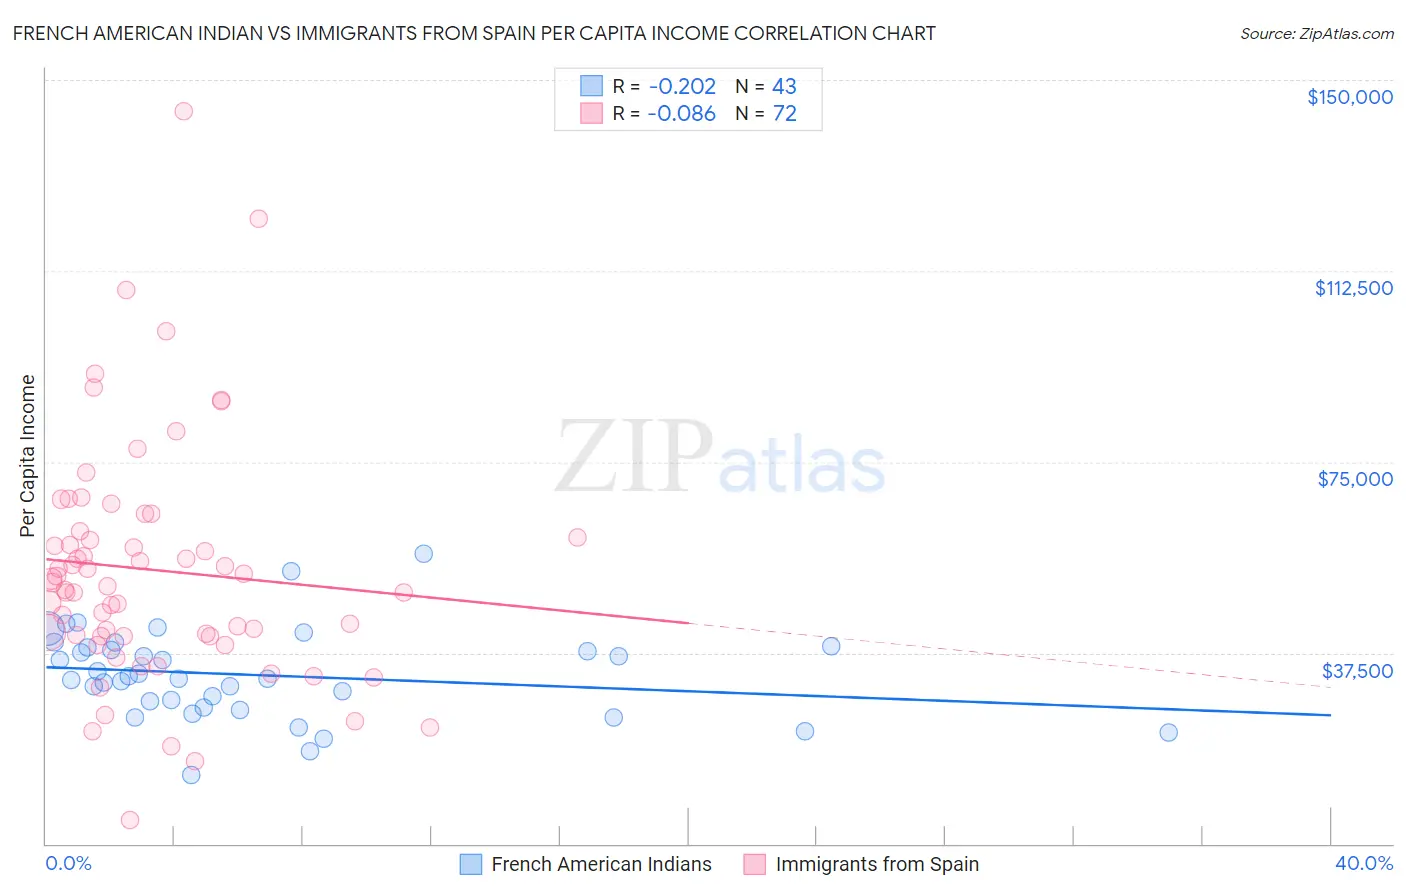 French American Indian vs Immigrants from Spain Per Capita Income